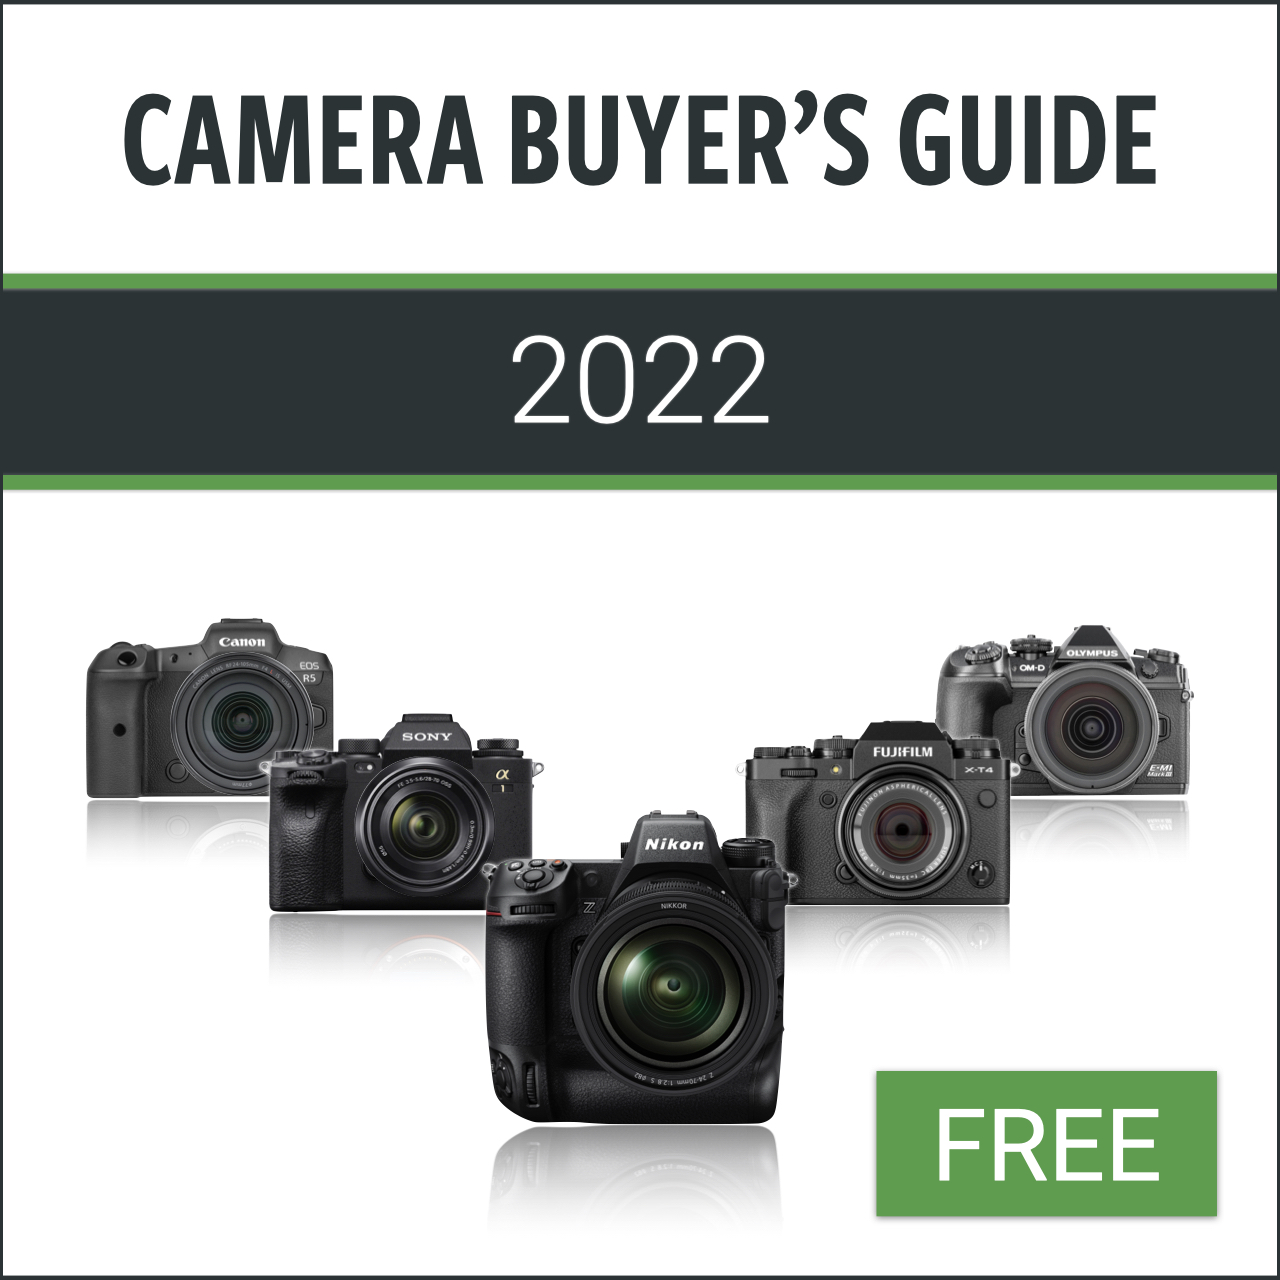 Camera Buyer’s Guide: 2022